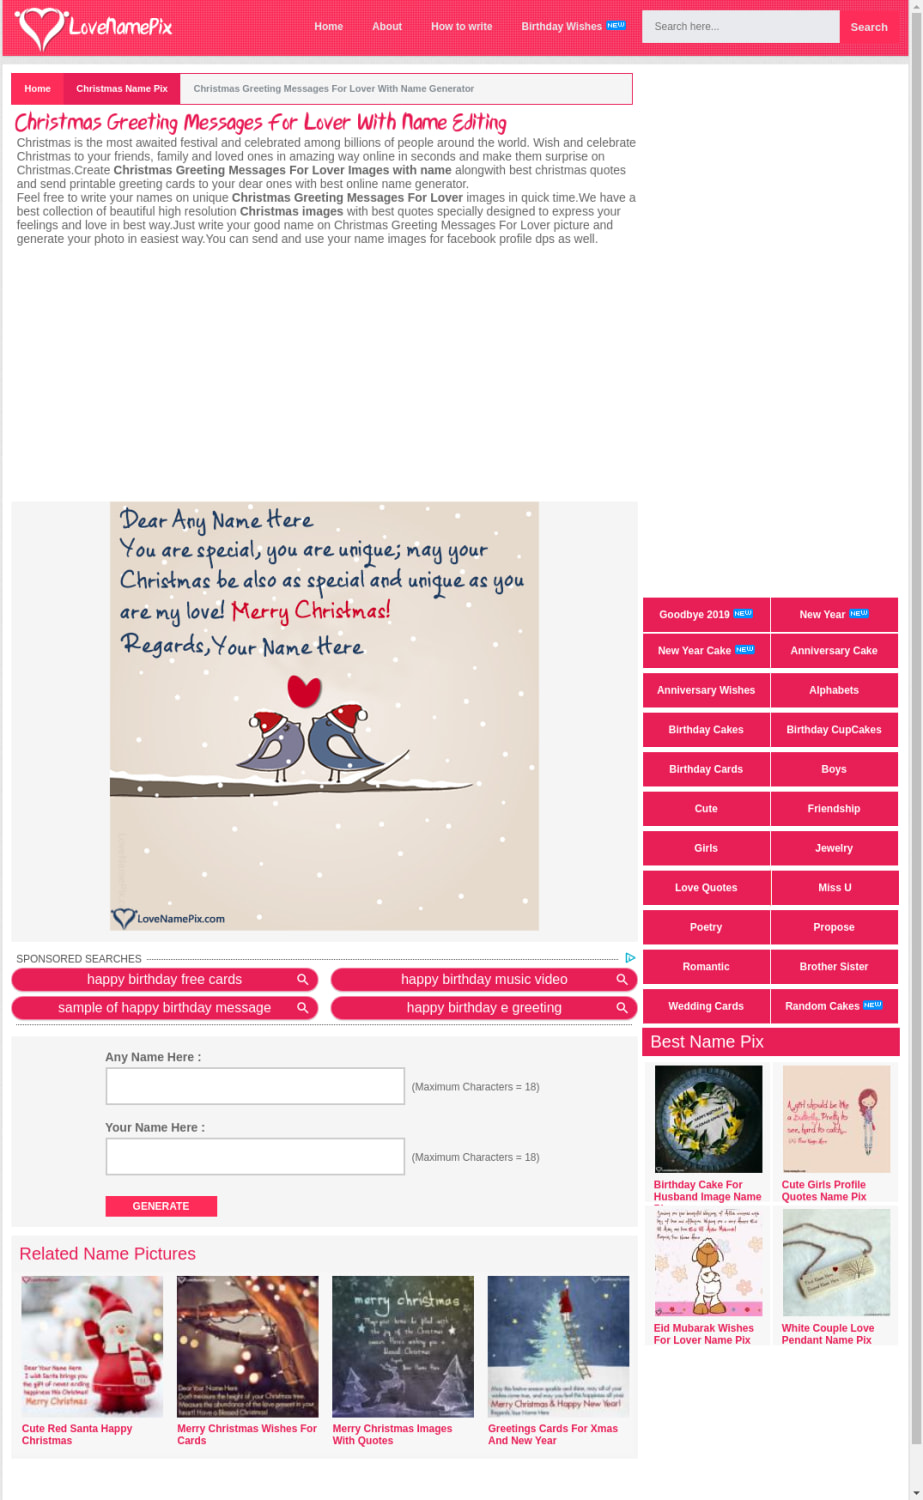 Christmas Greeting Messages For Lover With Name Editing